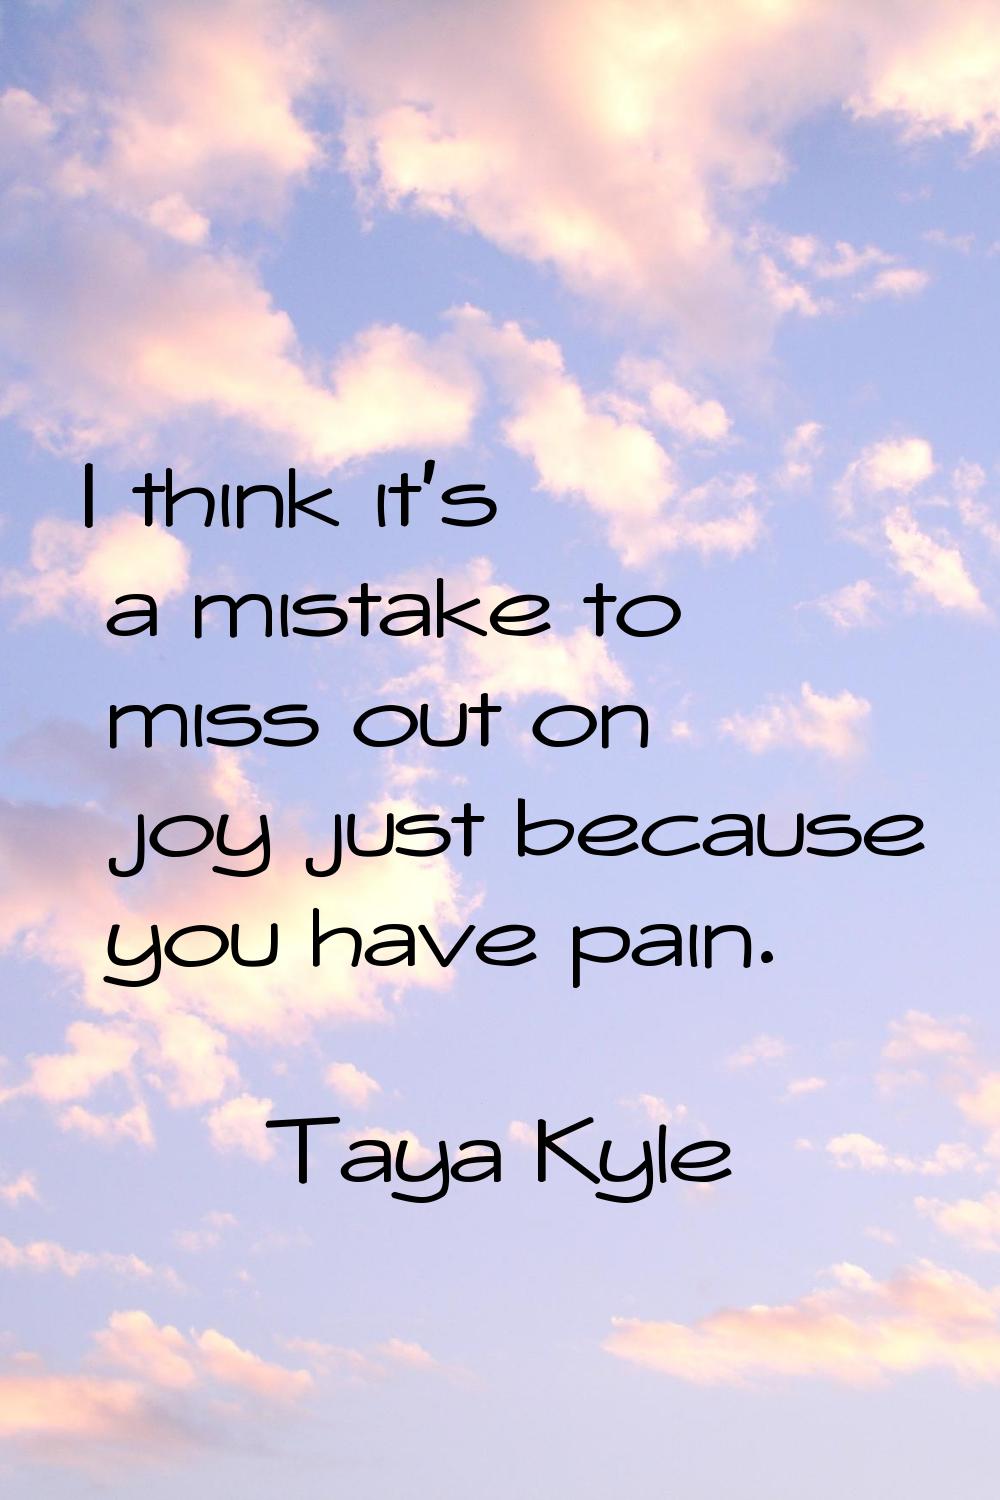 I think it's a mistake to miss out on joy just because you have pain.